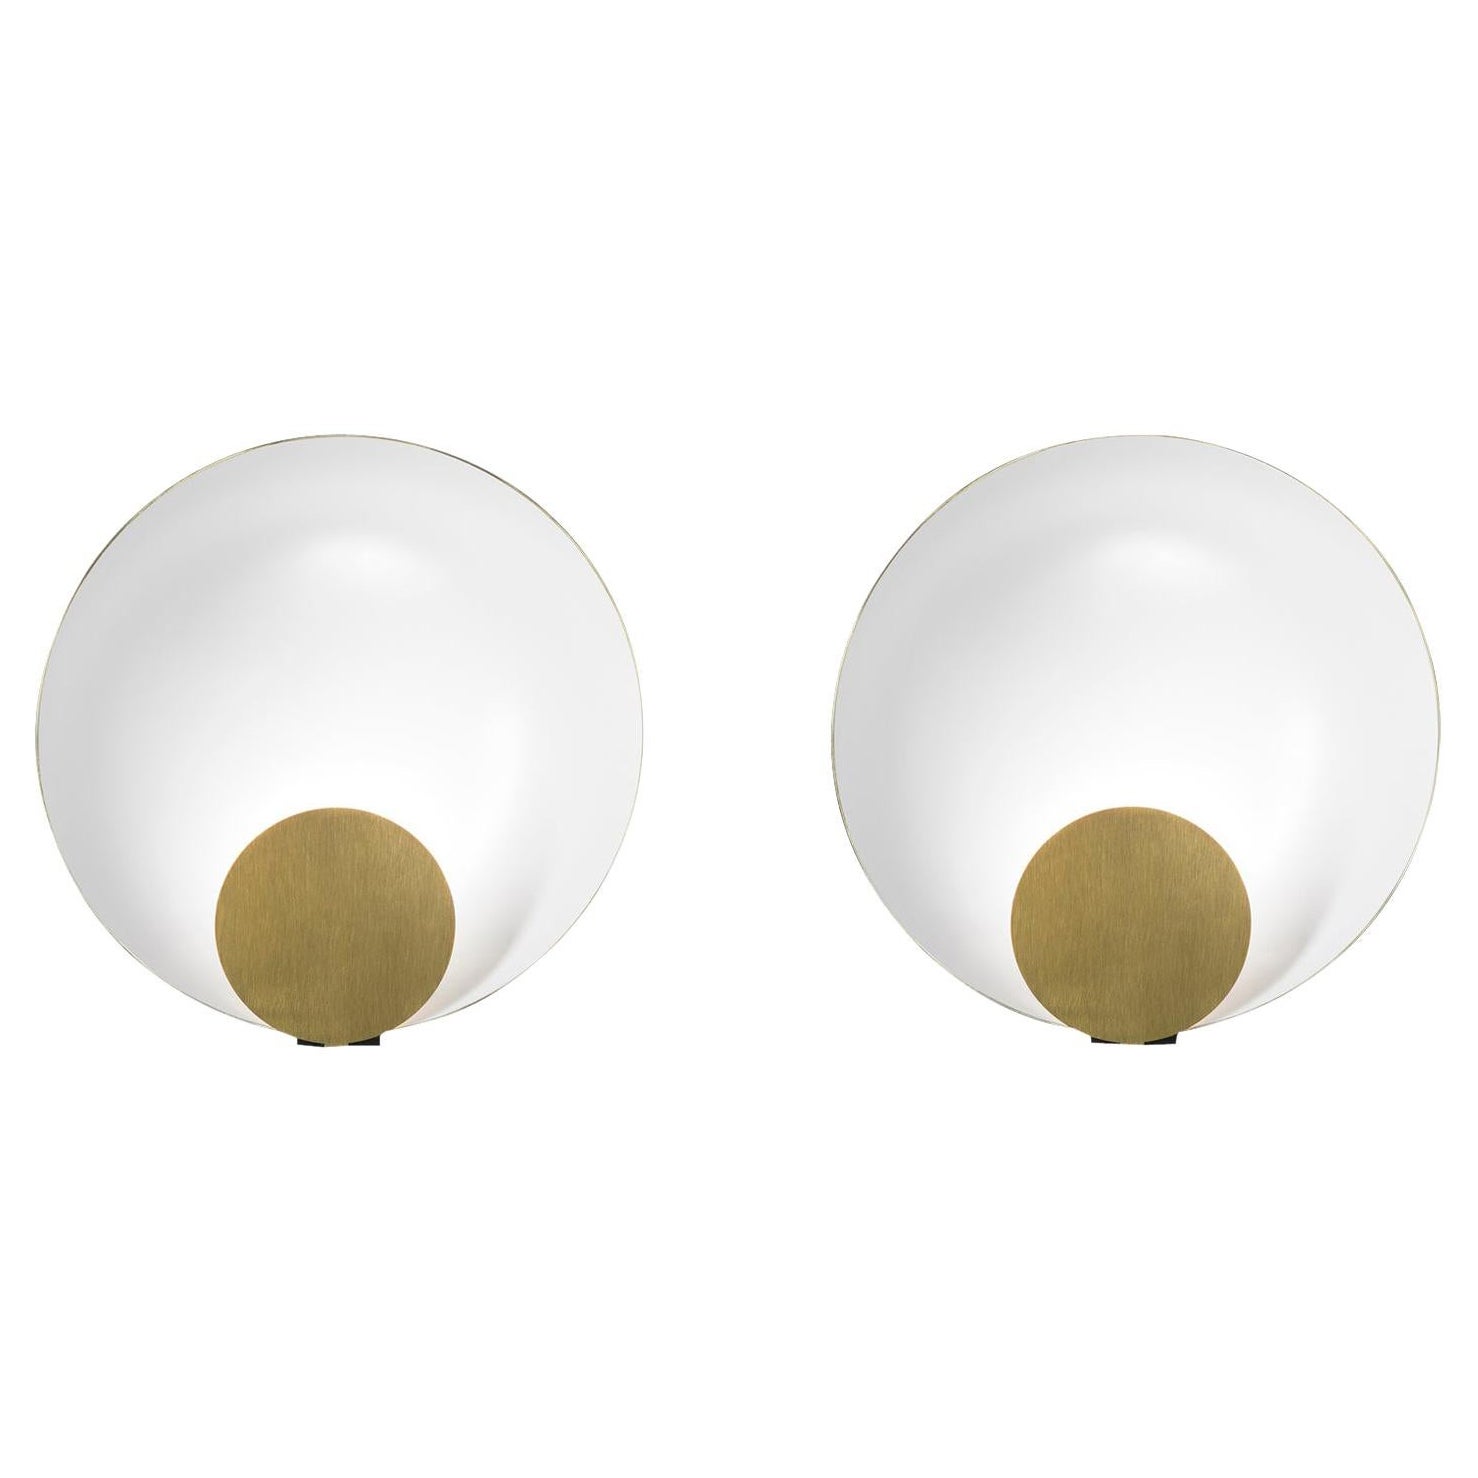 Set of Two Table Lamps 'Siro' Designed by Marta Perla, Manufactured by Oluce For Sale